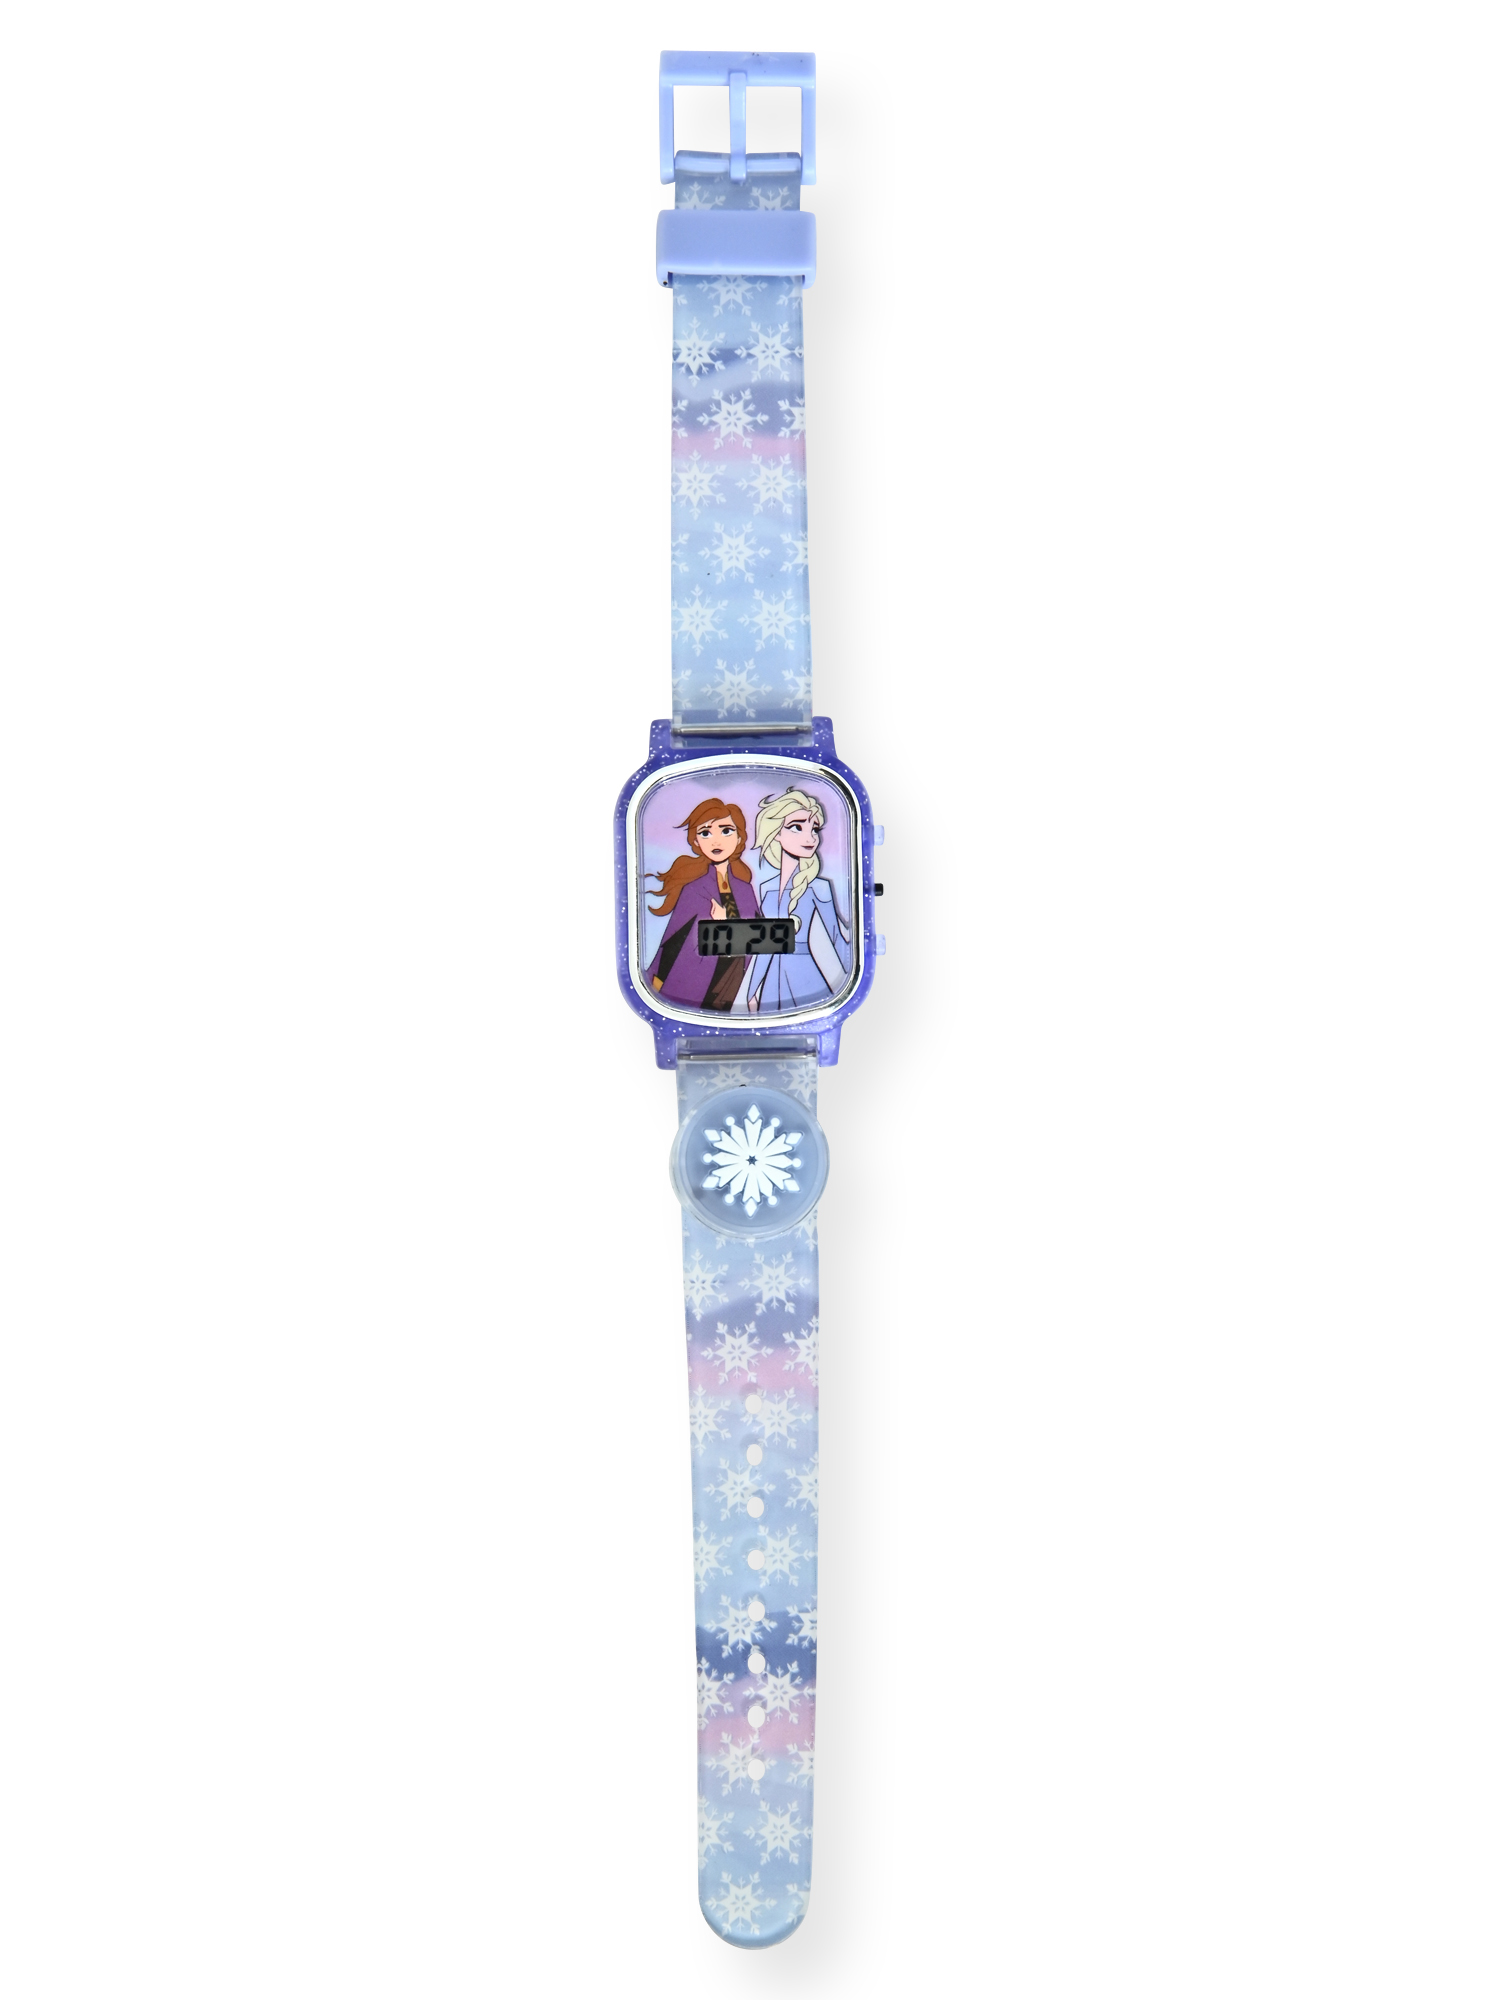 Disney Frozen Female Child LCD Watch with Flashing Lights on a Silicone Strap (FZN4954WM) - image 2 of 3